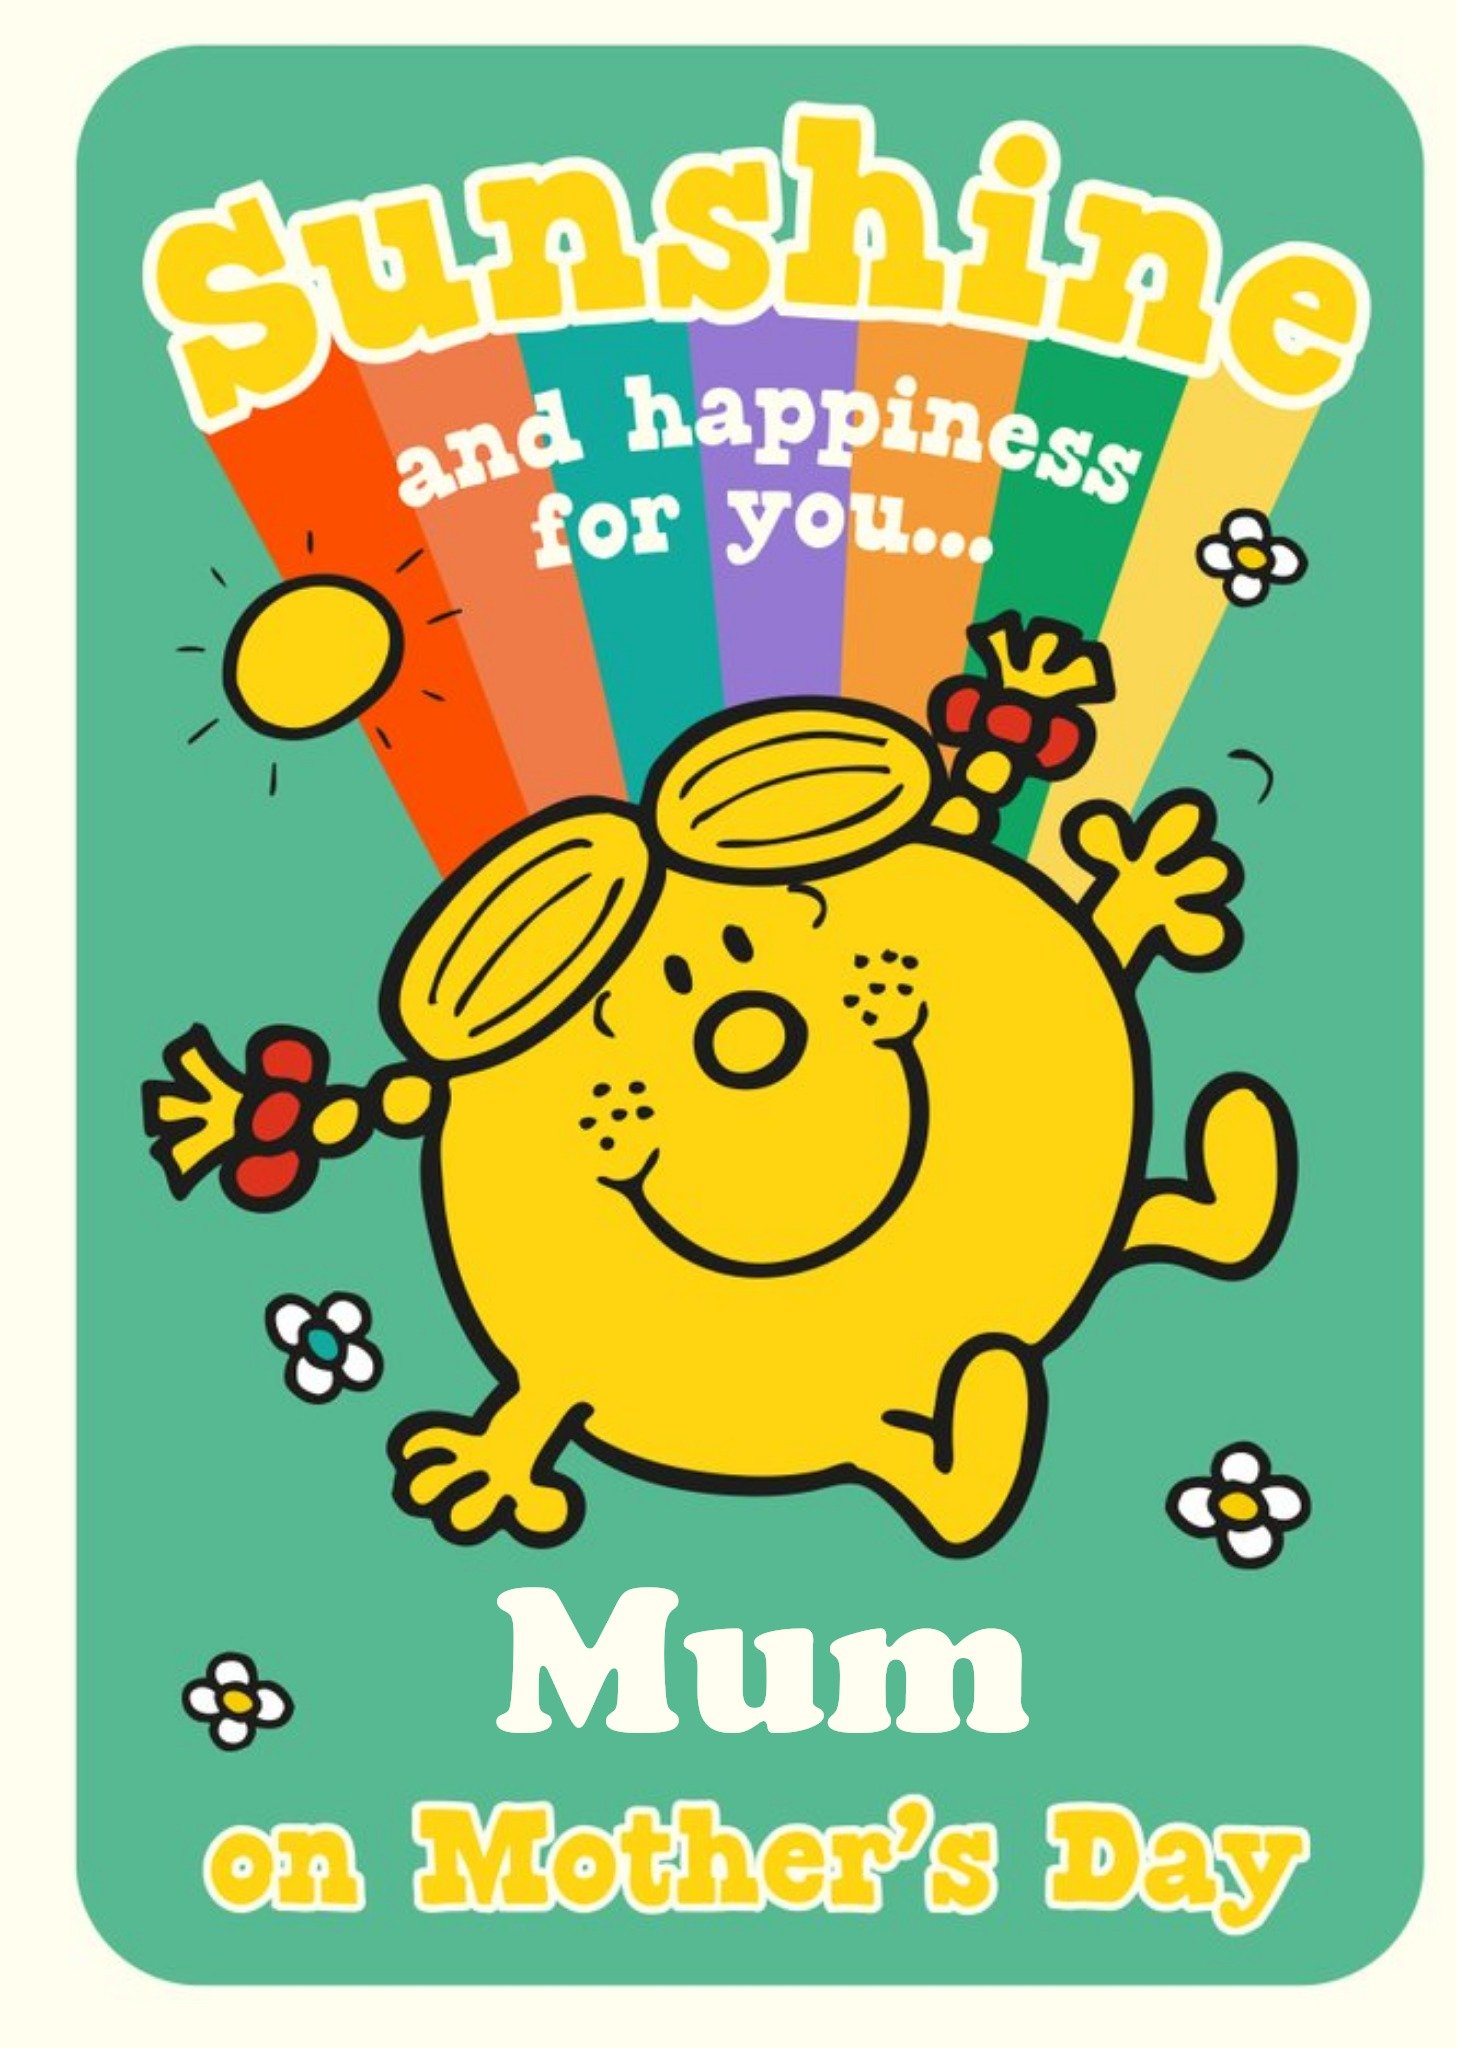 Moonpig Little Miss Sunshine Mr Men Sunshine And Happiness To You Mum On Mothers Day Card Ecard